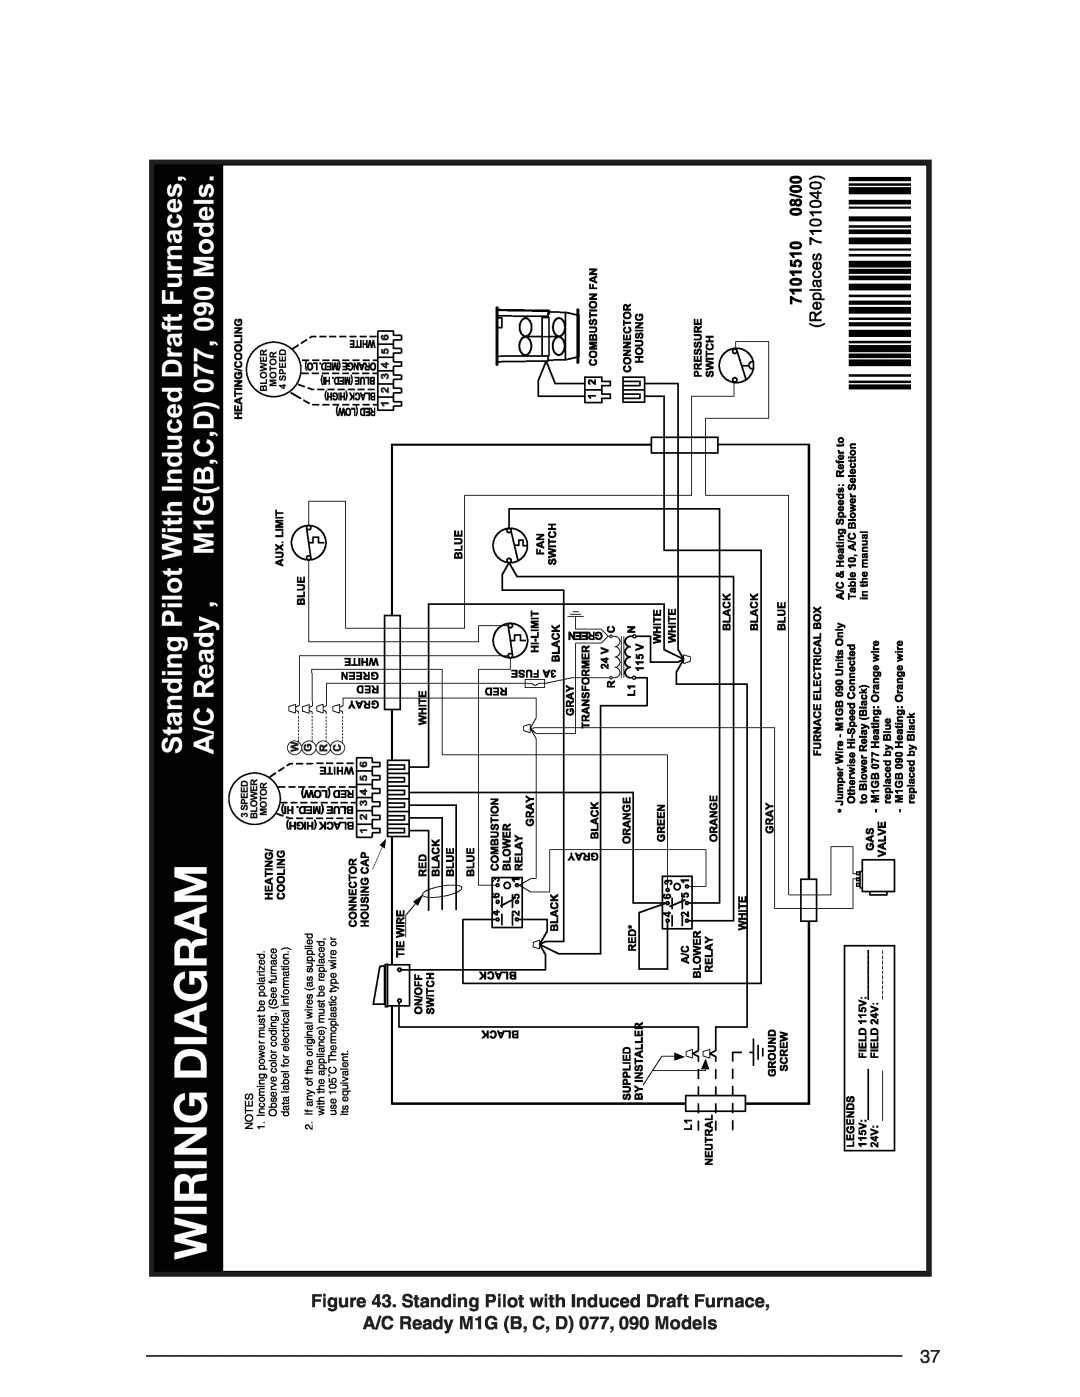 Nordyne AND M5S Wiring Diagram, A/C Ready M1G B, C, D 077, 090 Models, Incoming power must be polarized, its equivalent 